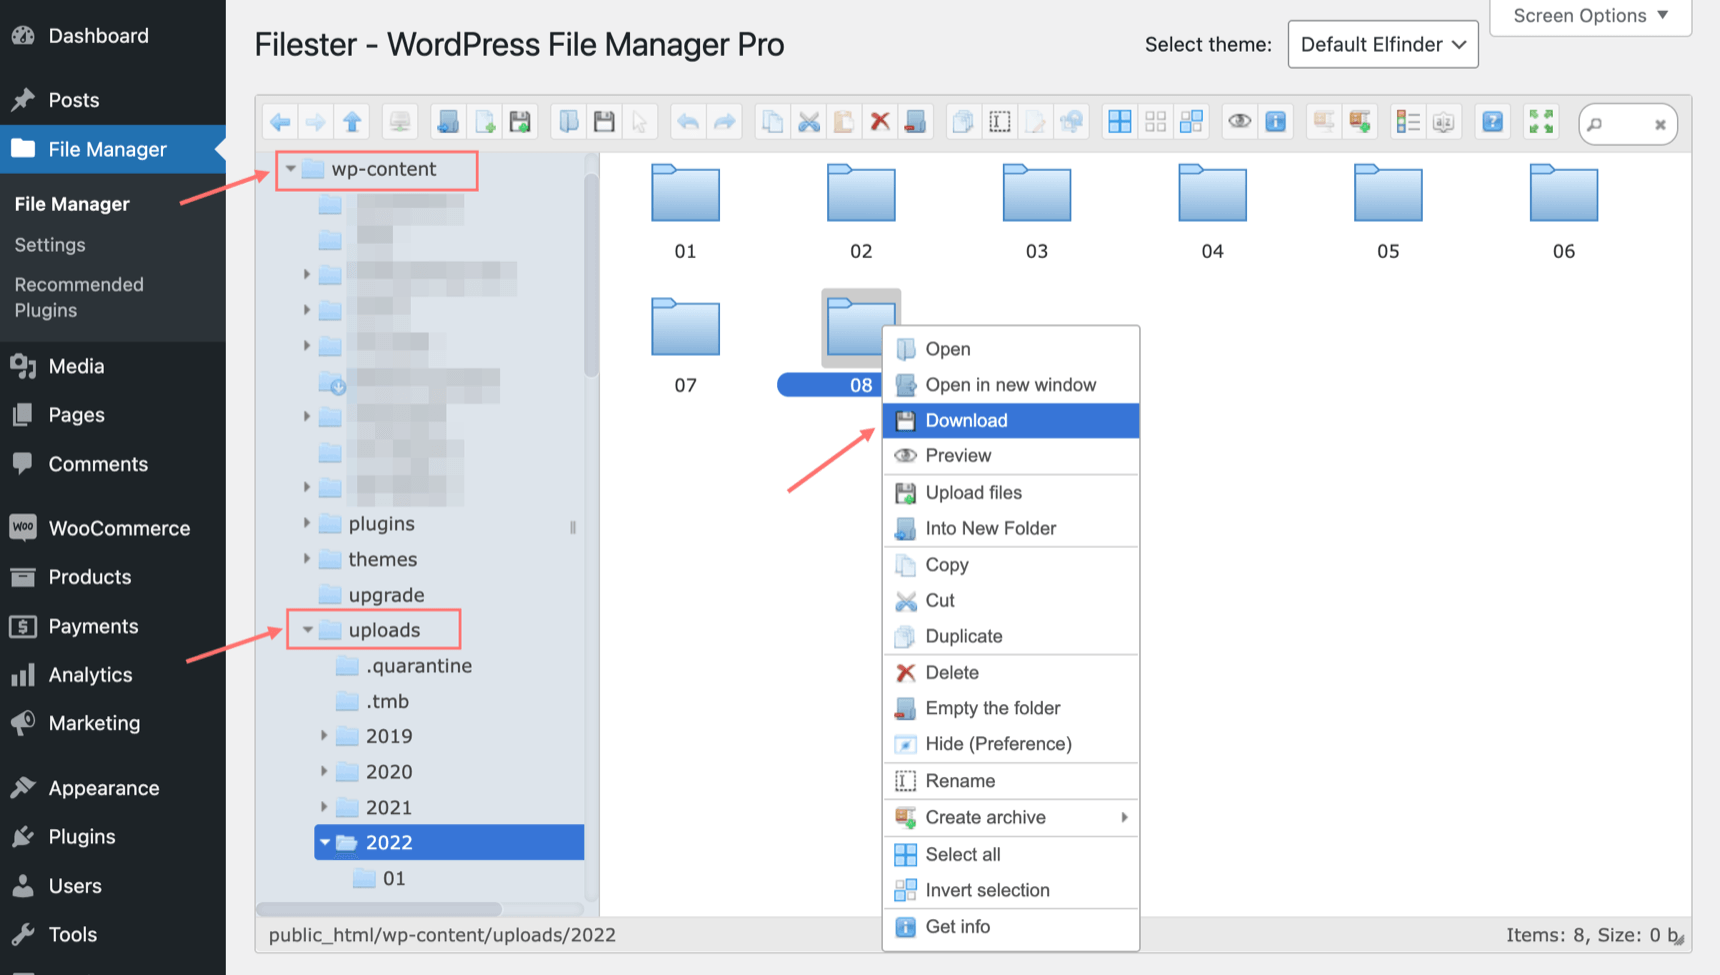 How to download WordPress image uploads folder with Filester